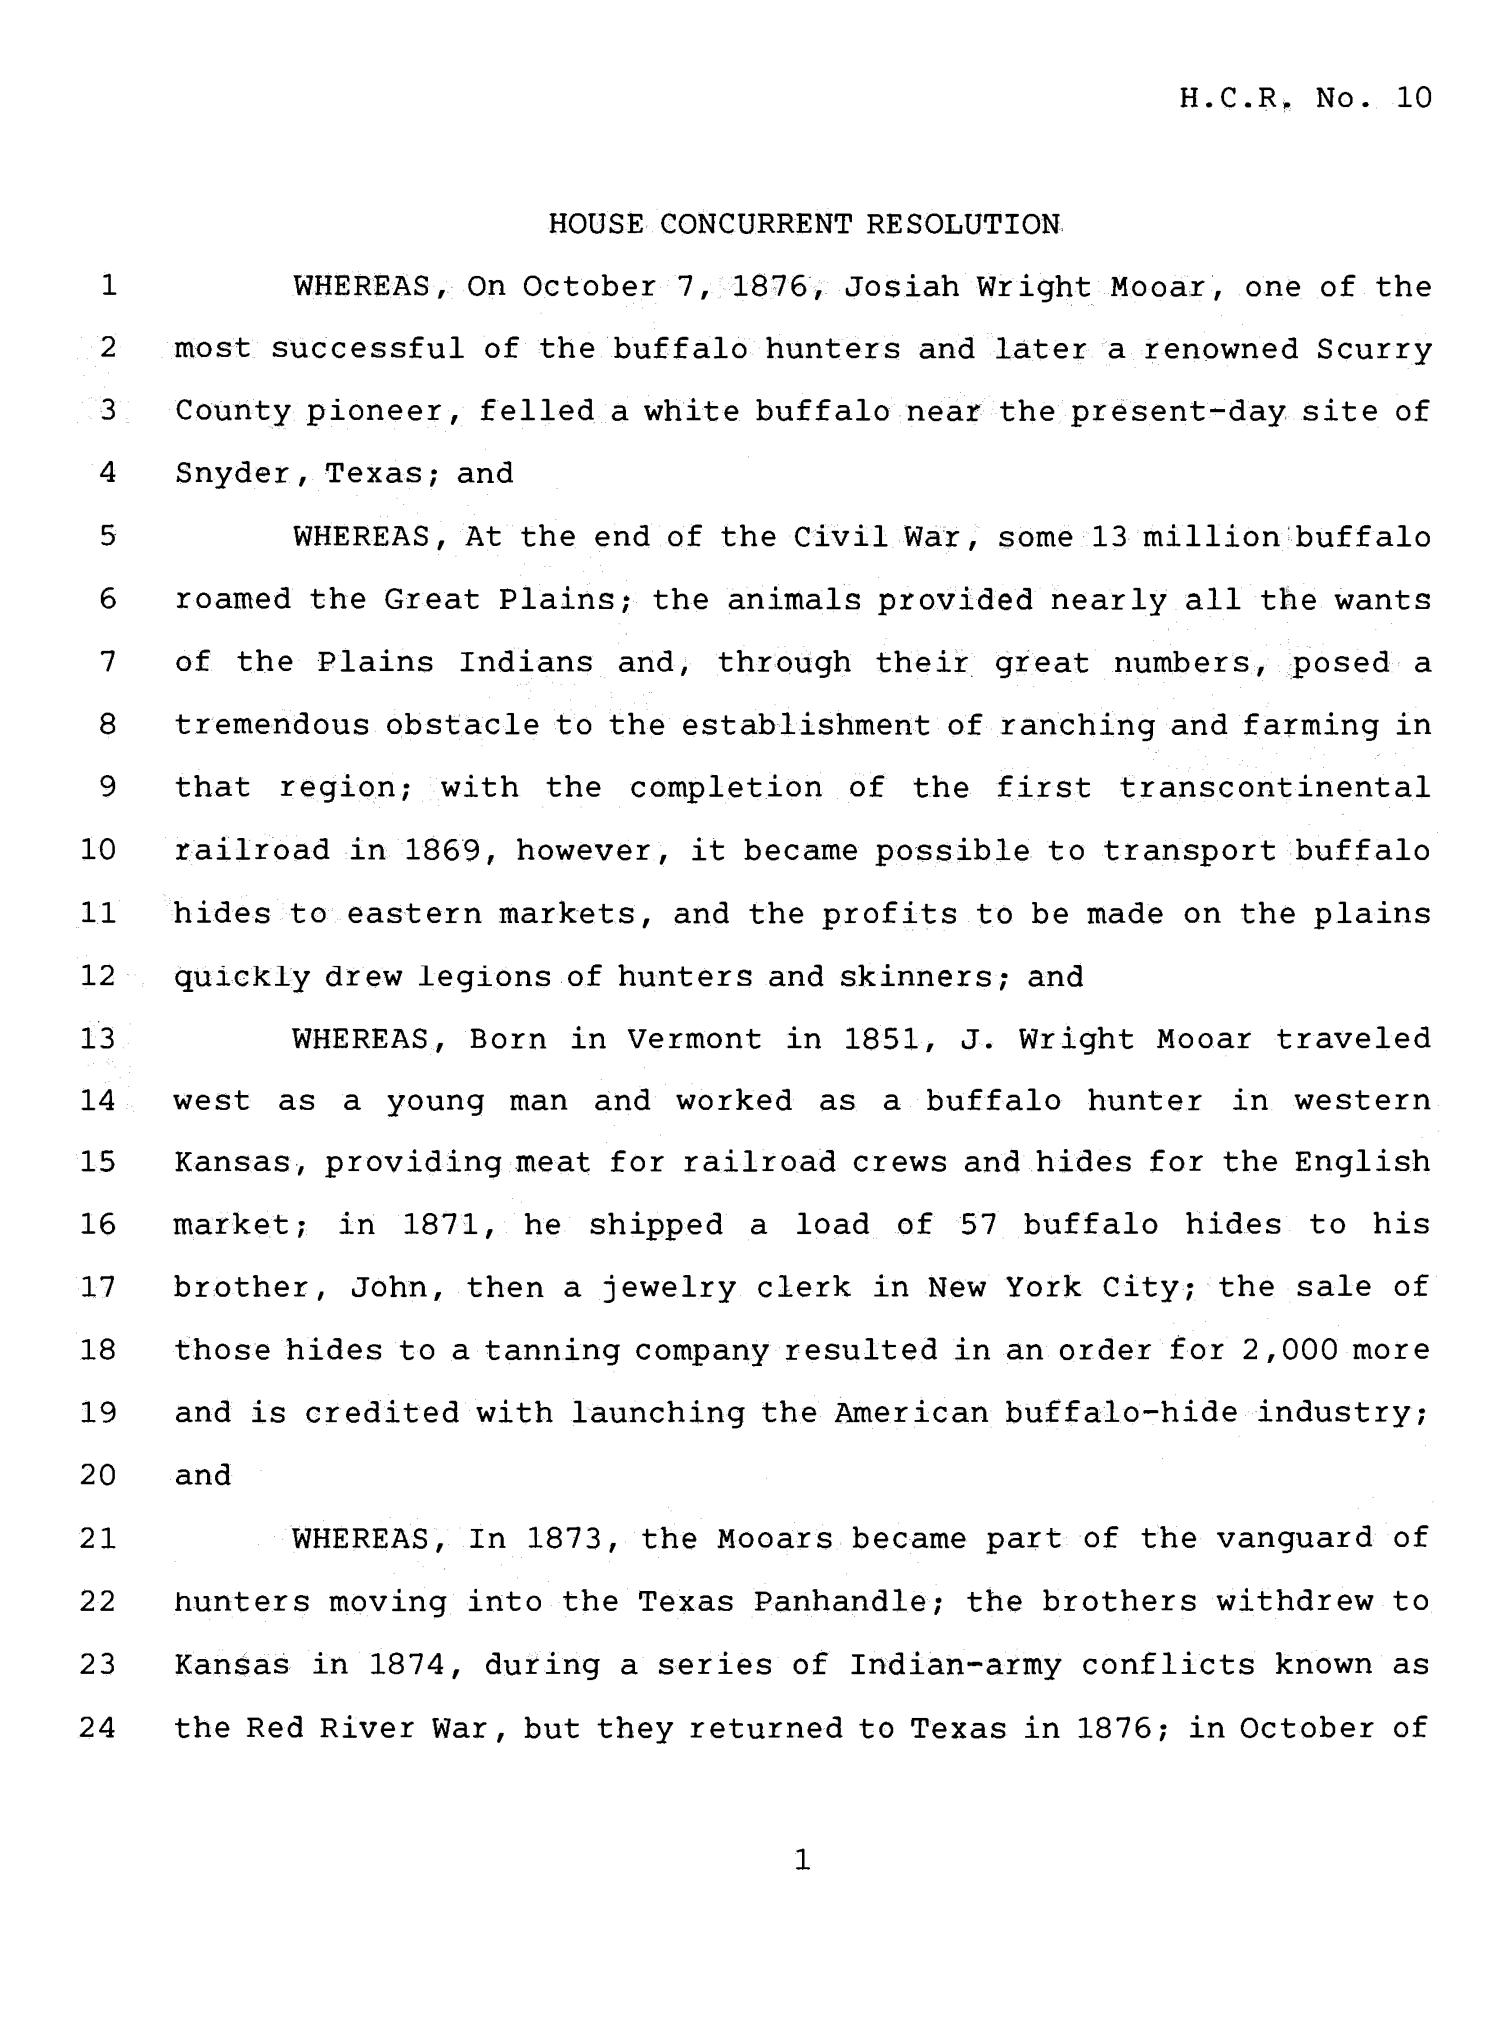 78th Texas Legislature, Fourth Called Session, House Concurrent Resolution 10
                                                
                                                    [Sequence #]: 1 of 5
                                                